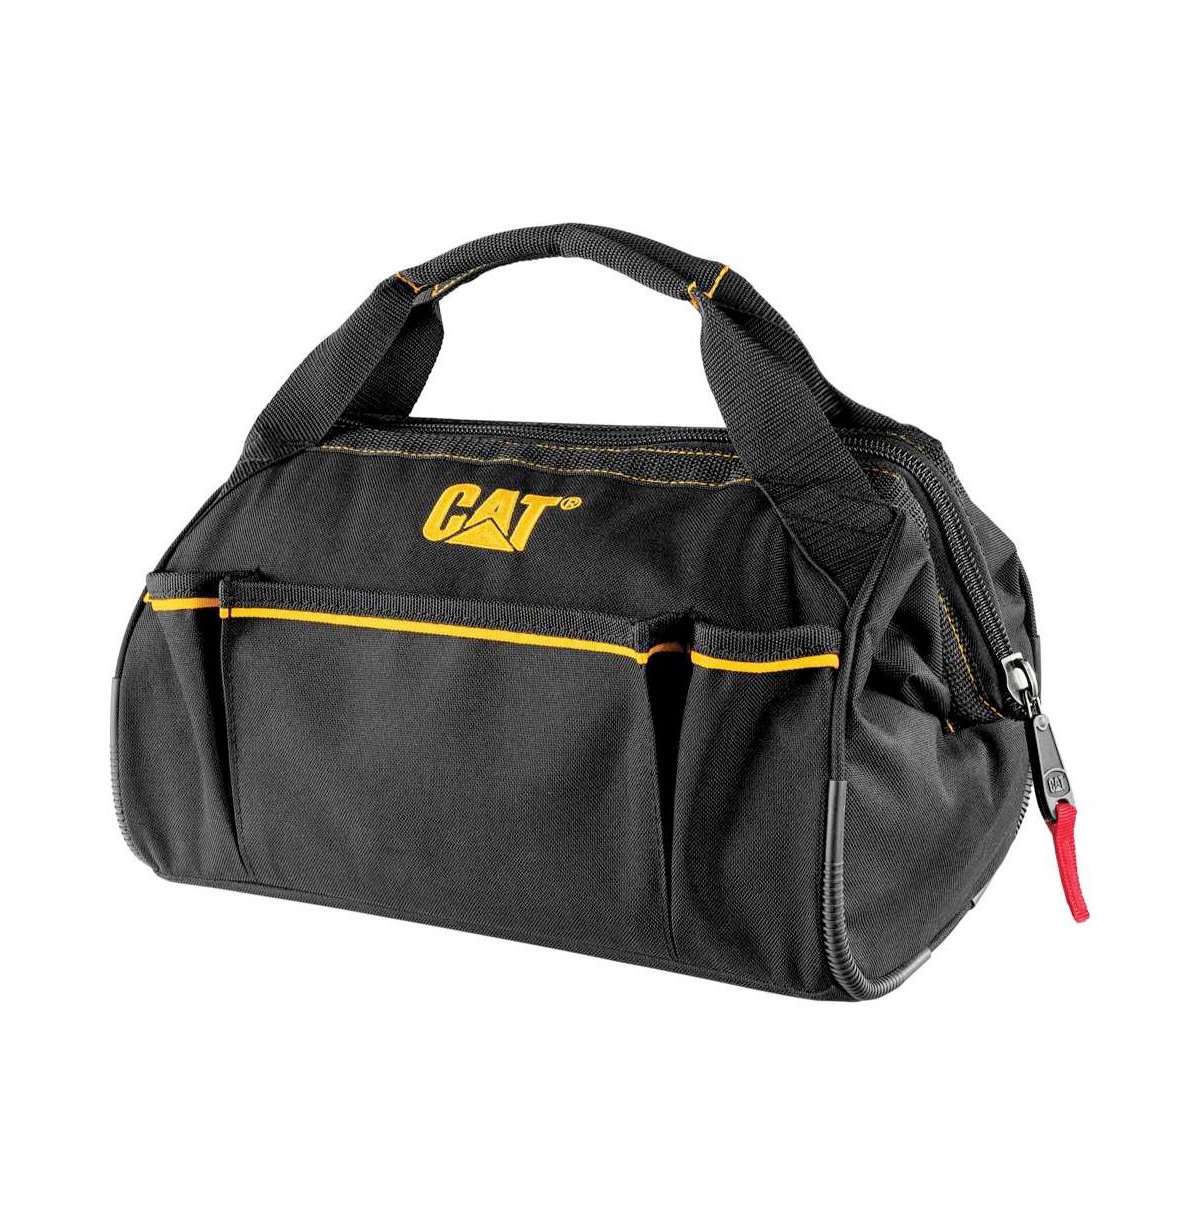 13 Inch Wide-Mouth Tool Bag with Pockets - Black